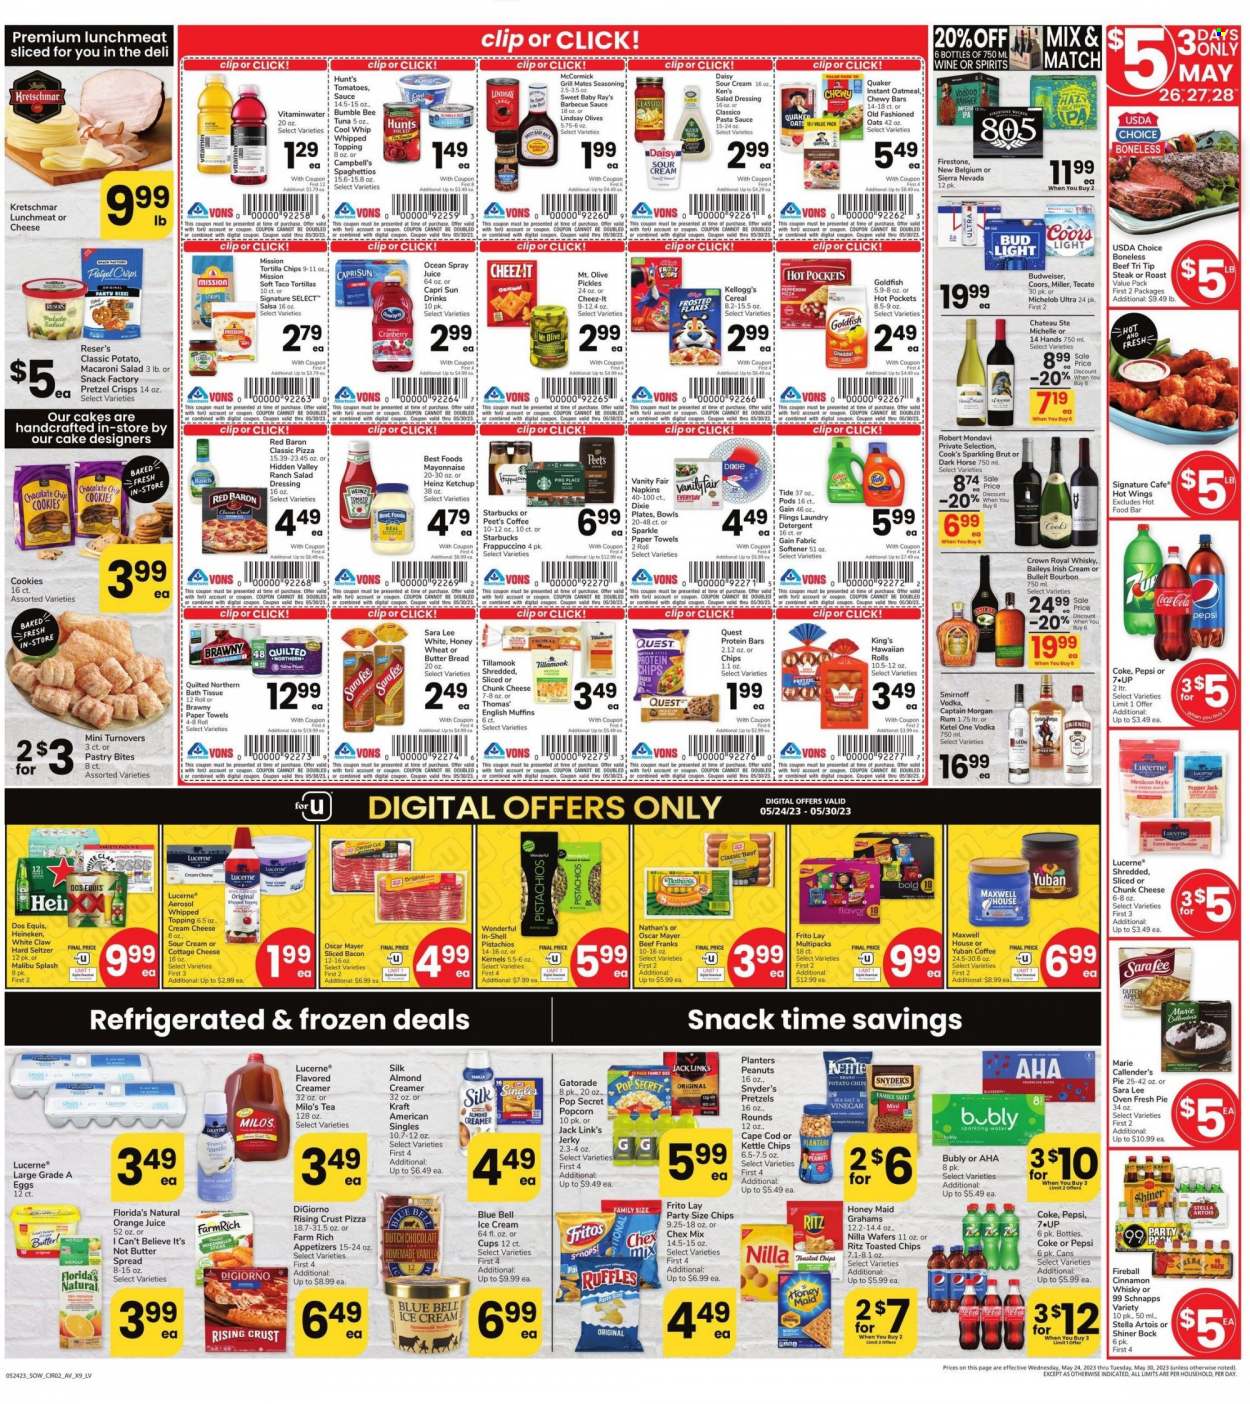 thumbnail - Vons Flyer - 05/24/2023 - 05/30/2023 - Sales products - bread, english muffins, cake, pie, Sara Lee, turnovers, hawaiian rolls, steak, roast, tuna, Campbell's, hot pocket, pizza, pasta sauce, Bumble Bee, sauce, Quaker, Marie Callender's, Kraft®, ready meal, bacon, jerky, snack, Cook's, Oscar Mayer, frankfurters, potato salad, macaroni salad, lunch meat, cottage cheese, cream cheese, sliced cheese, Pepper Jack cheese, cheese, Kraft Singles, chunk cheese, eggs, I Can't Believe It's Not Butter, Cool Whip, sour cream, creamer, almond creamer, mayonnaise, ice cream, Blue Bell, strips, Red Baron, cookies, wafers, chocolate chips, Kellogg's, Florida's Natural, RITZ, Fritos, tortilla chips, potato chips, popcorn, Goldfish, Cheez-It, Ruffles, pretzel crisps, Jack Link's, Chex Mix, Kettle chips, oatmeal, topping, Heinz, pickles, olives, cereals, protein bar, Honey Maid, spice, BBQ sauce, salad dressing, ketchup, dressing, salsa, Classico, Baileys, peanuts, pistachios, Planters, Capri Sun, Coca-Cola, Pepsi, orange juice, juice, soft drink, Milo's, Gatorade, Coke, sparkling water, water, Maxwell House, tea, coffee, Starbucks, frappuccino, sparkling wine, alcohol, bourbon, Captain Morgan, rum, schnapps, Smirnoff, vodka, irish cream, liquor, Malibu, White Claw, Hard Seltzer, cinnamon whisky, whisky, beer, Stella Artois, Bud Light, Heineken, Miller, IPA, Shiner Bock, napkins, bath tissue, Quilted Northern, kitchen towels, paper towels, detergent, Gain, Tide, fabric softener, laundry detergent, Dial, Brut, plate, Dixie, electrolyte drink, Budweiser, Coors, Dos Equis, Michelob. Page 2.